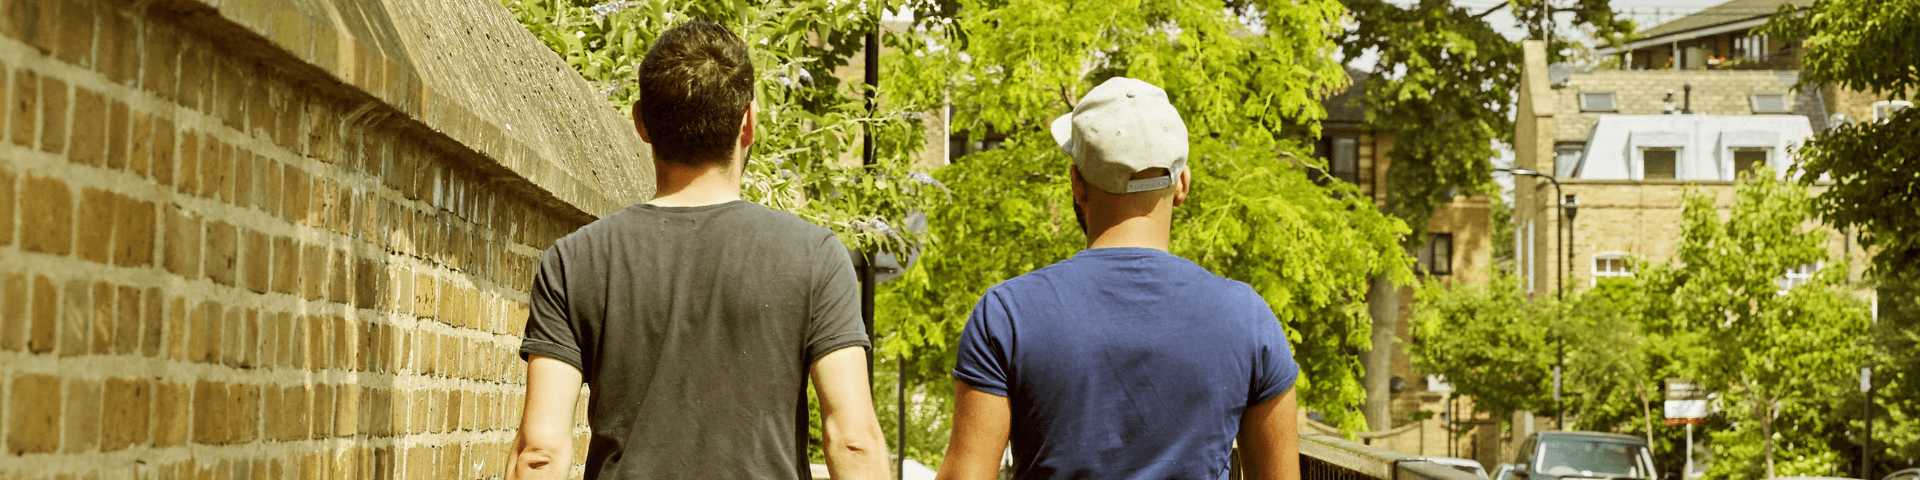 A Black person and a white person walk down a leafy, sunny street, hands held. They face away from the camera.